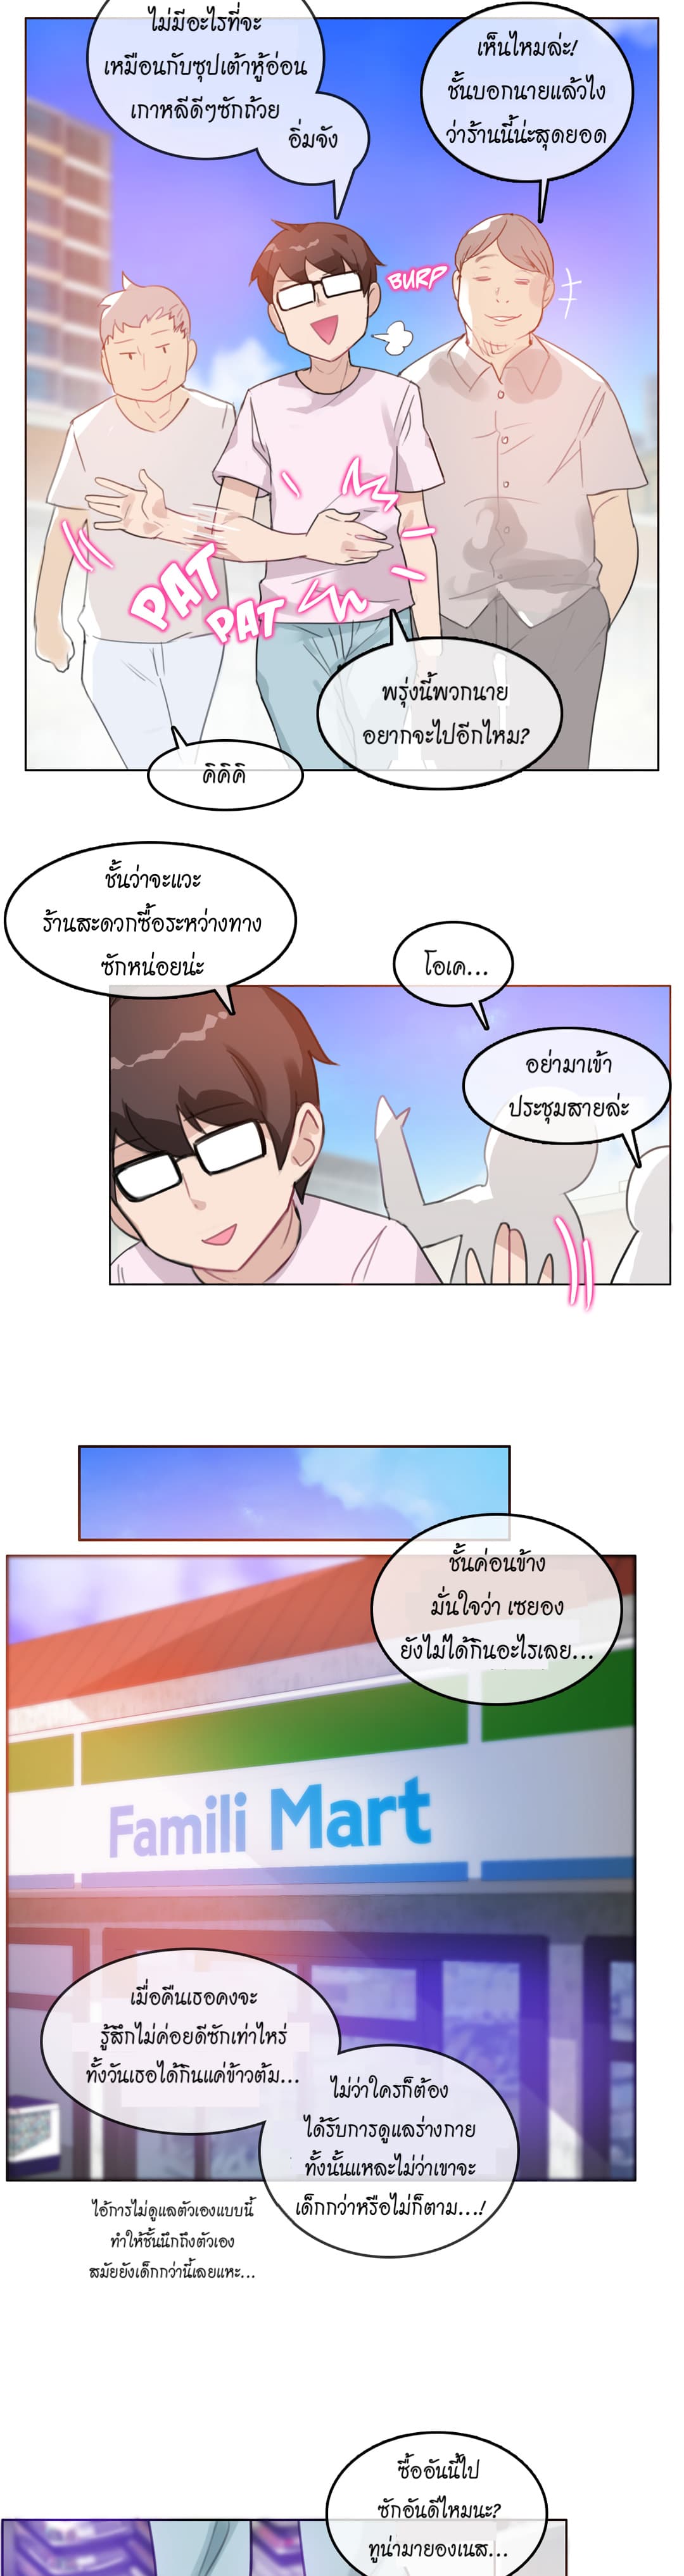 A Pervert’s Daily Life 16 (9)